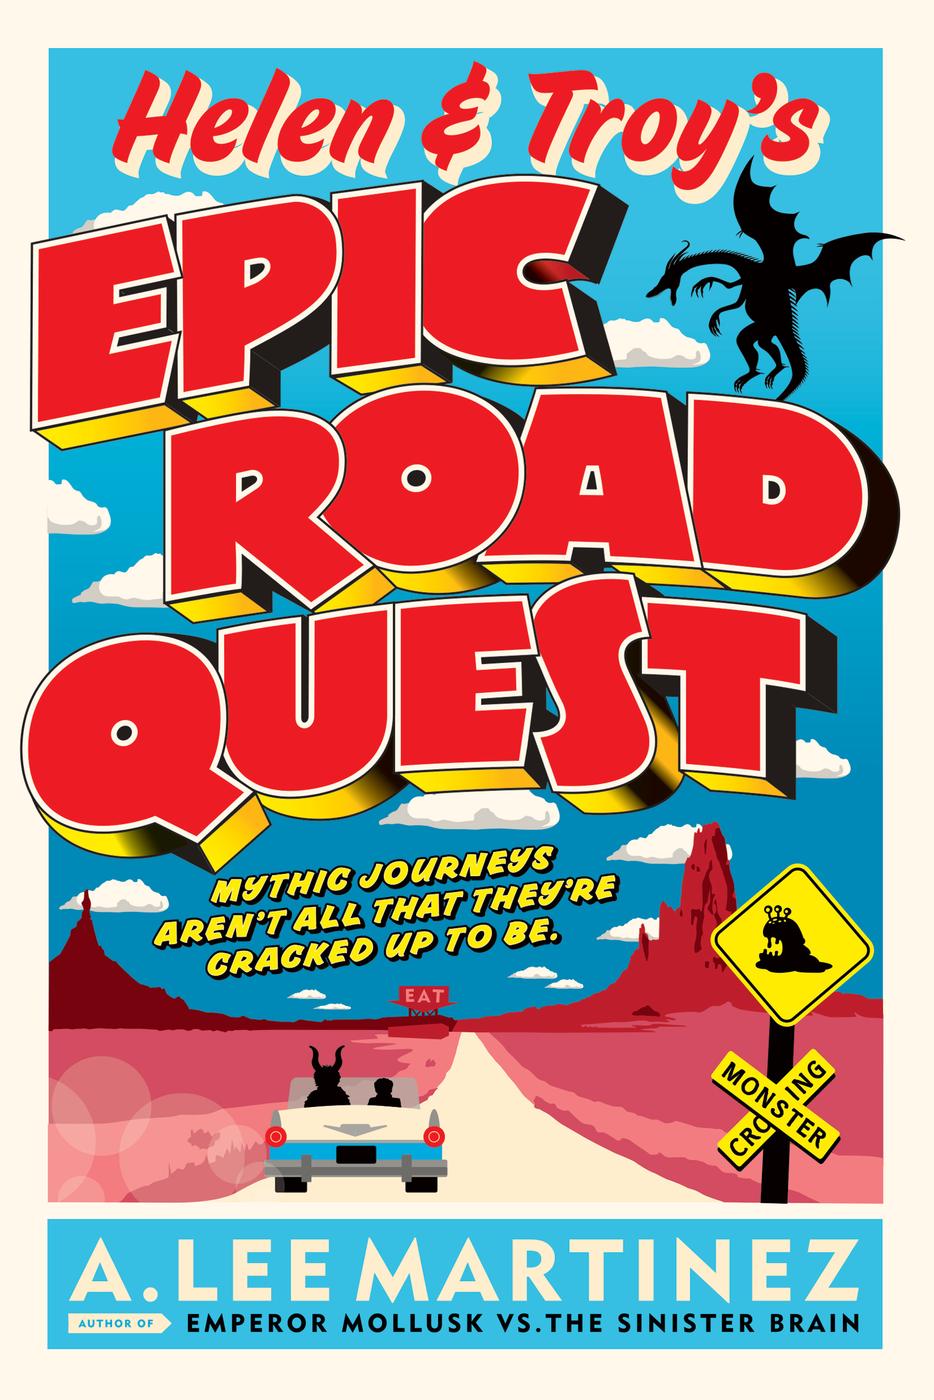 Helen and Troy's Epic Road Quest (2013) by A. Lee Martinez